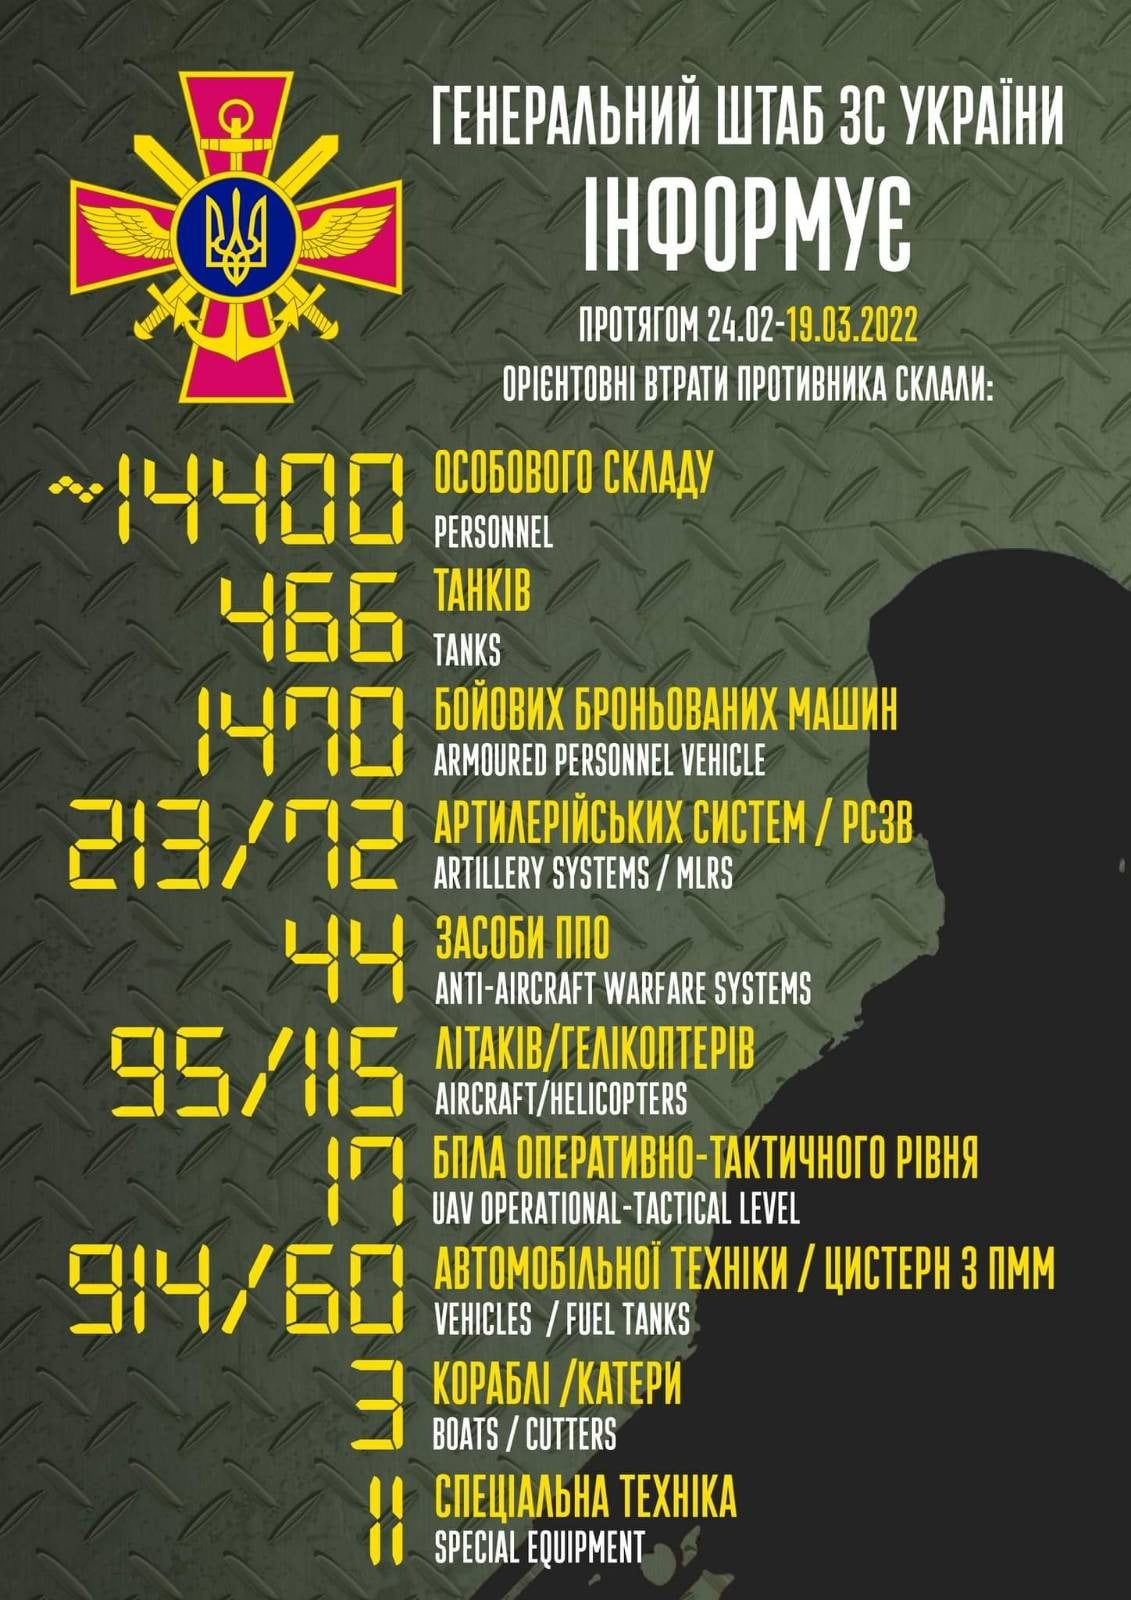 The total combat losses of the enemy from 24.02 to 19.03